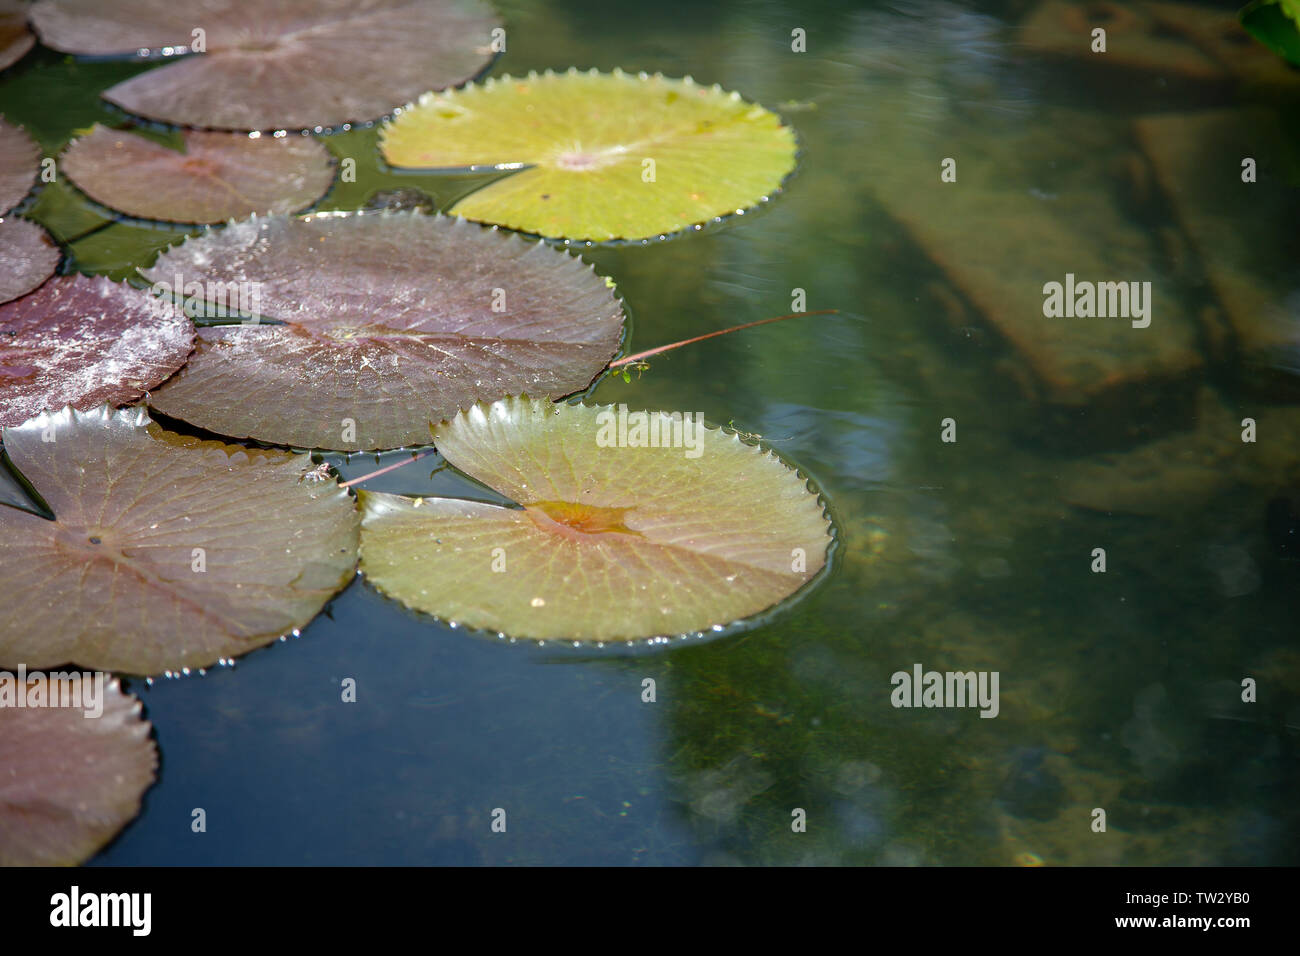 lotus leaf on water pond background natural comcept Stock Photo